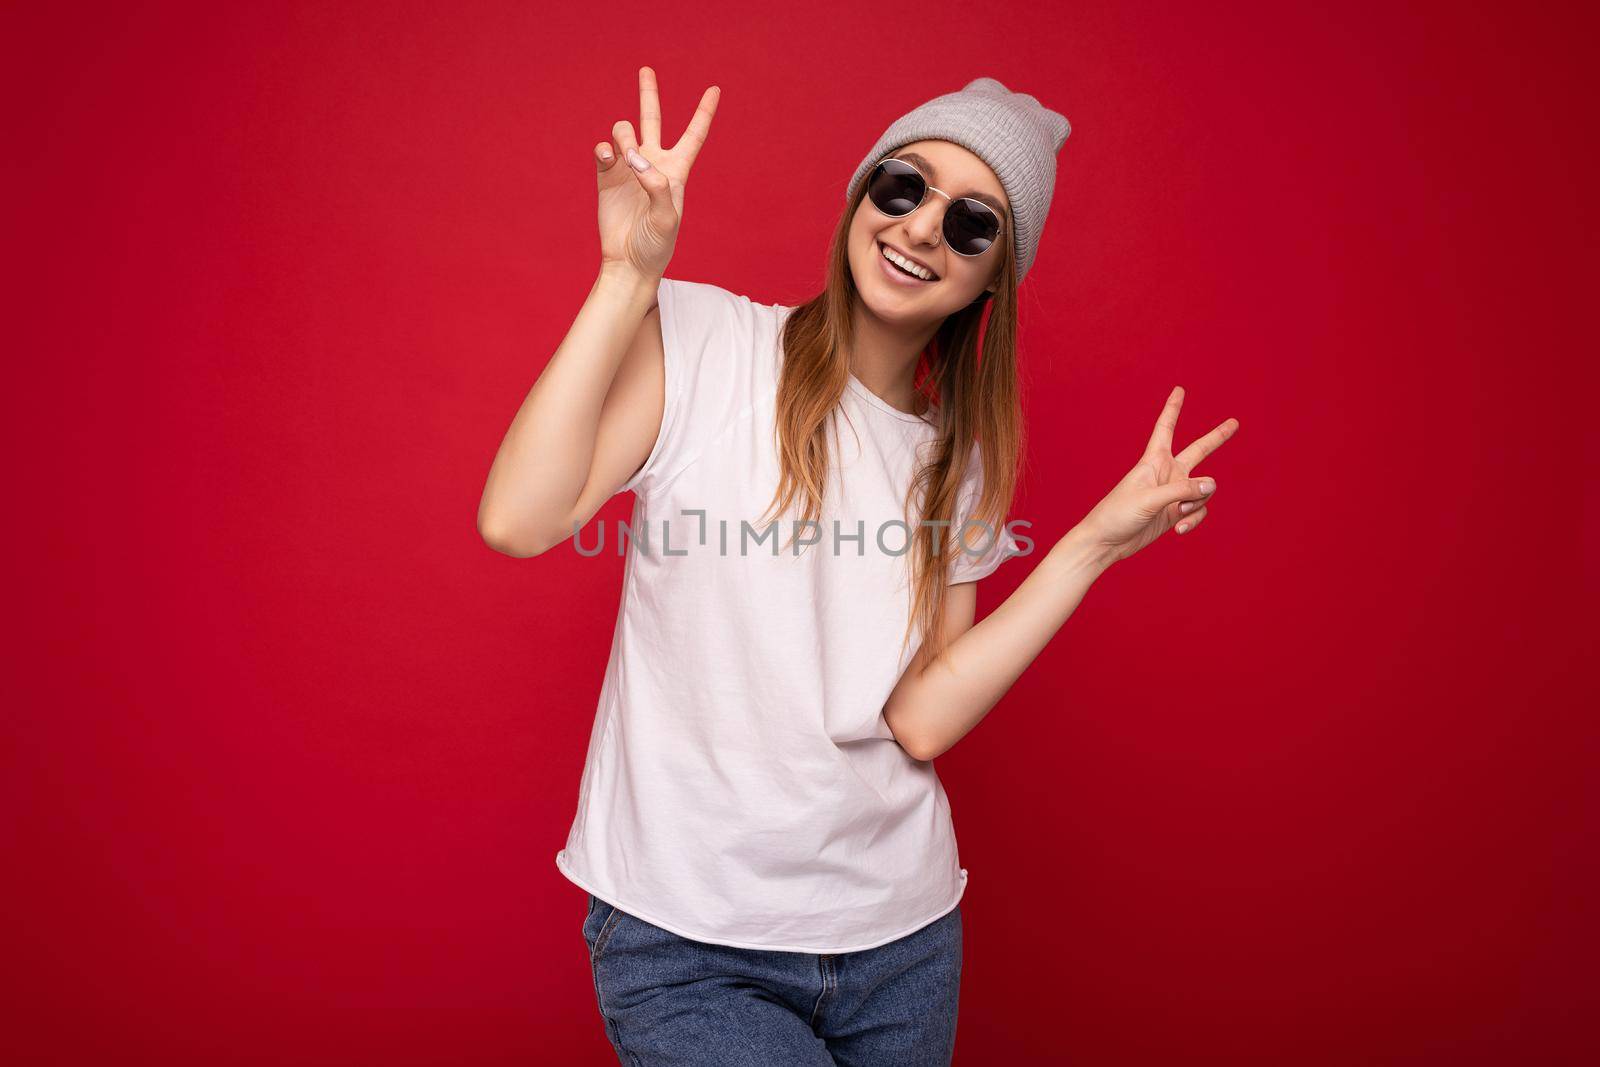 Portrait of young emotional positive happy smiling beautiful dark blonde woman with sincere emotions wearing casual white t-shirt with empty space for mockup gray hat and sunglasses isolated over red background with free space and showing peace gesture.